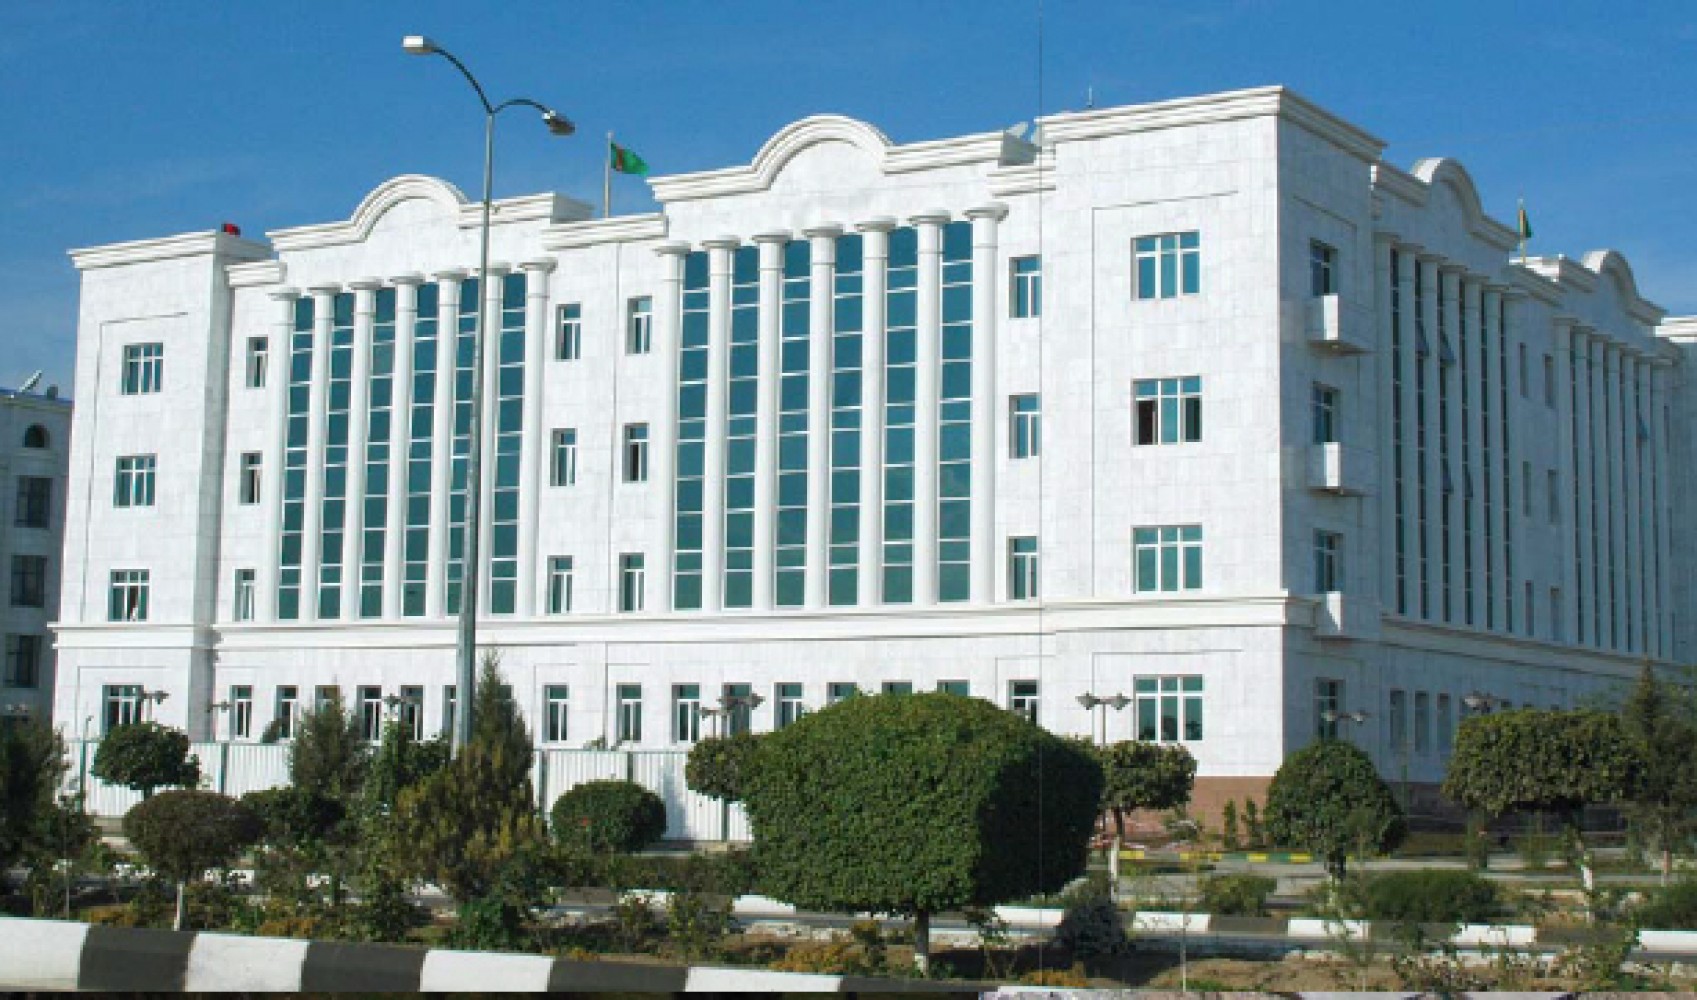 THE HOUSES OF TURKMENISTAN MINISTRY OF NATIONAL SECURITY